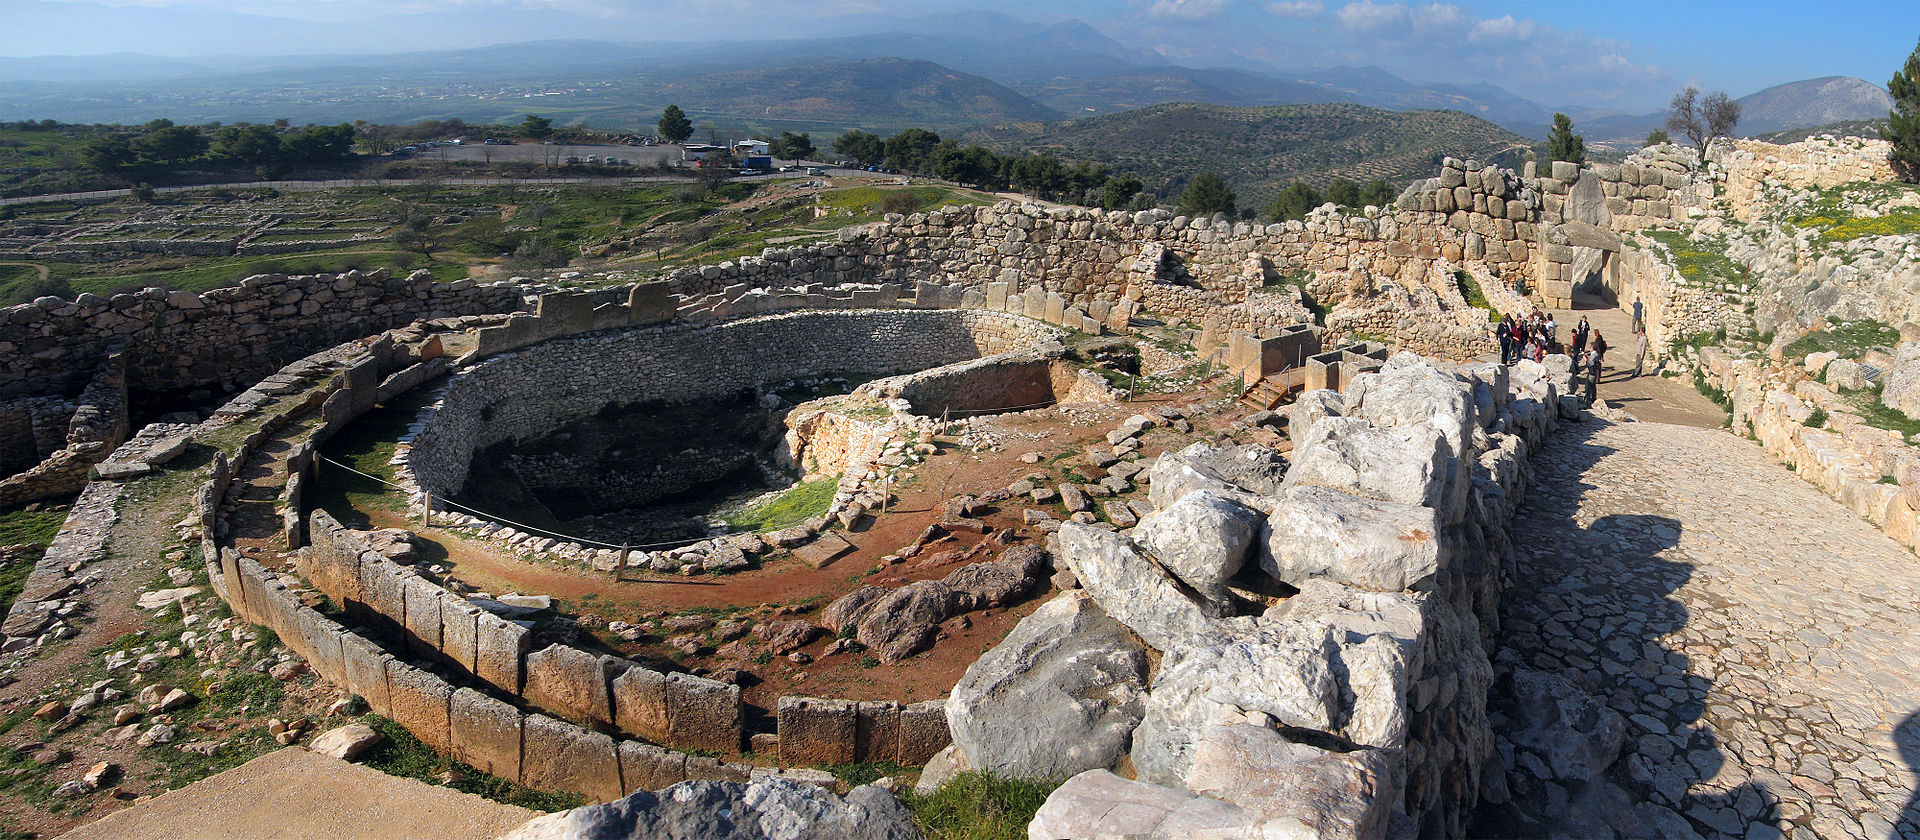 The Shaft Graves of Mycenae – Brewminate: We&#39;re Never Far from Where We Were